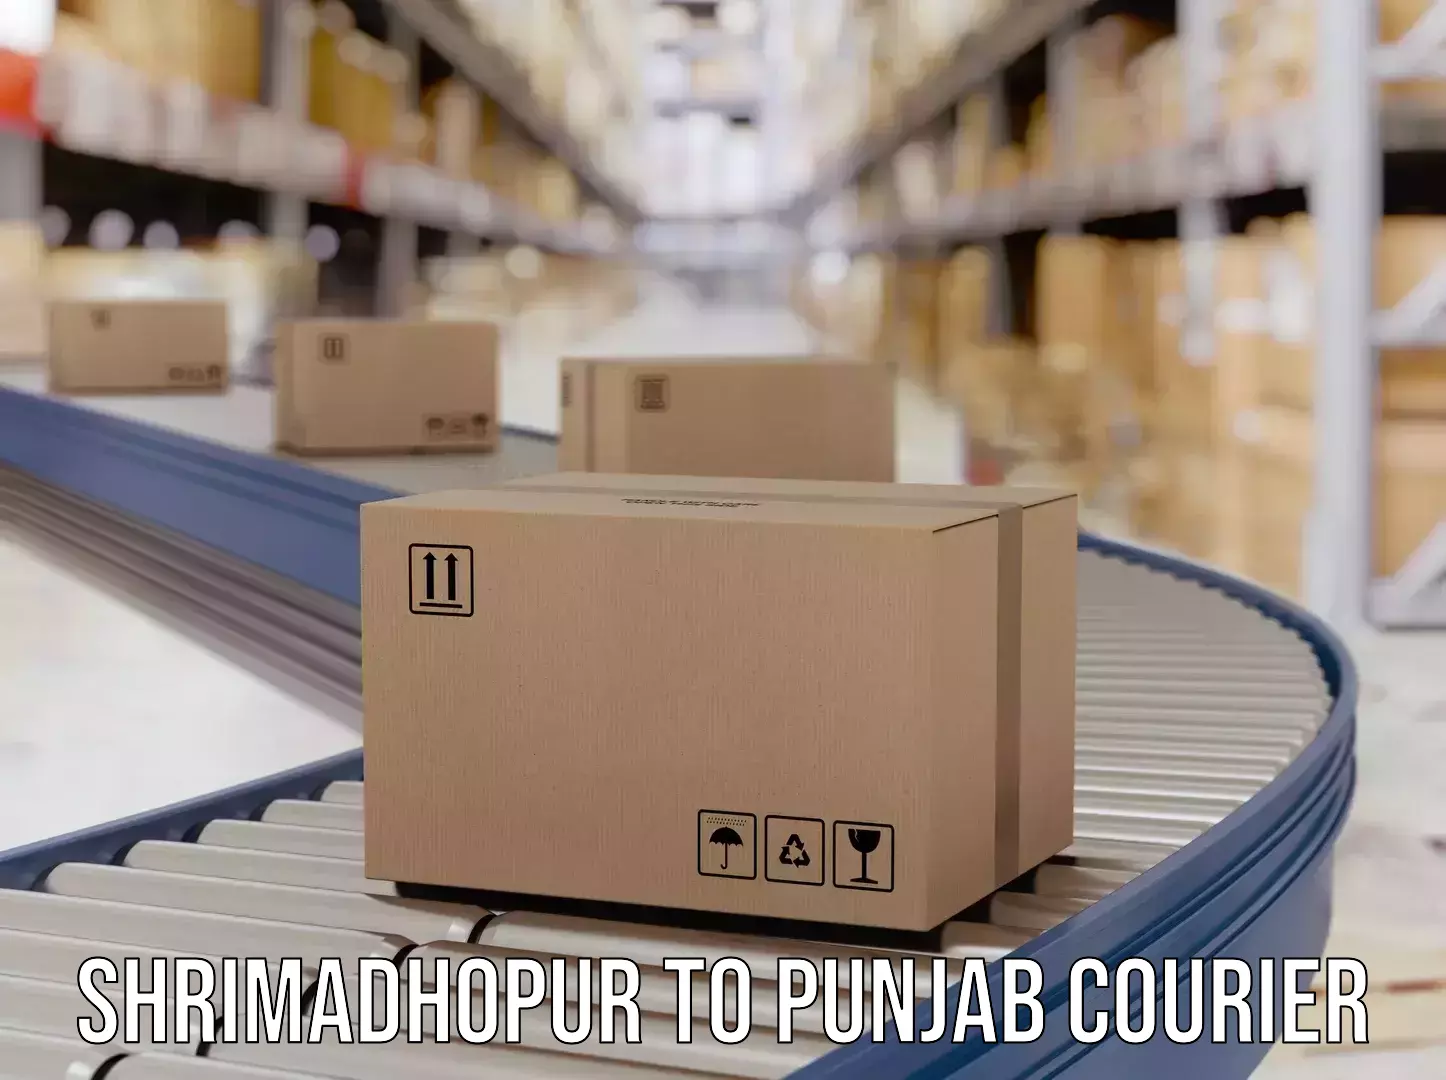 State-of-the-art courier technology Shrimadhopur to Jalalabad